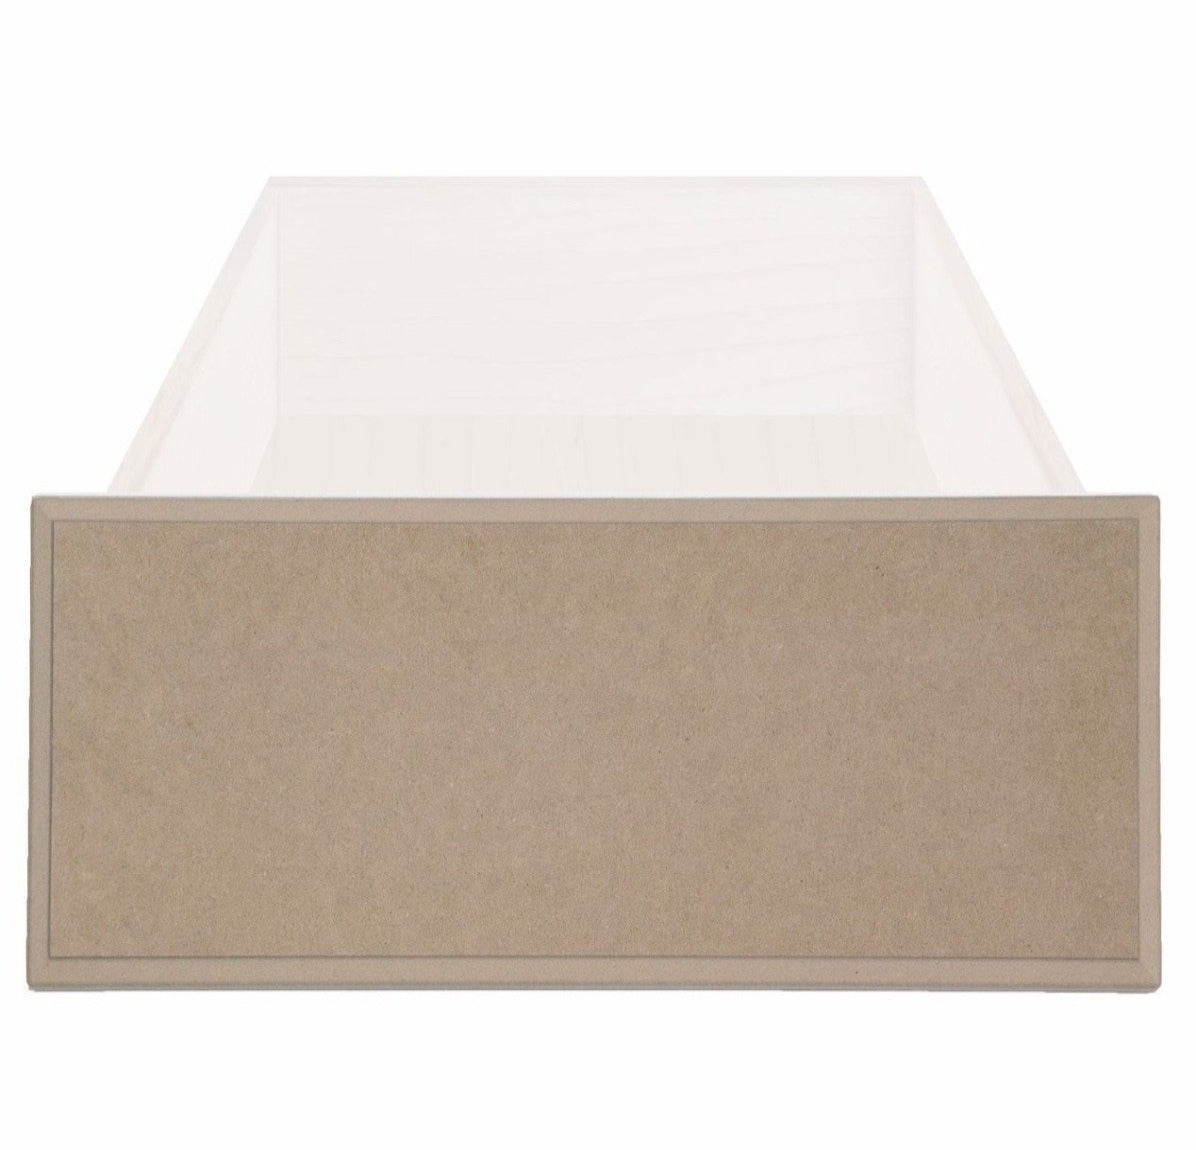 MDF Naples Thermofoil Slab Custom Cabinet Drawer Front